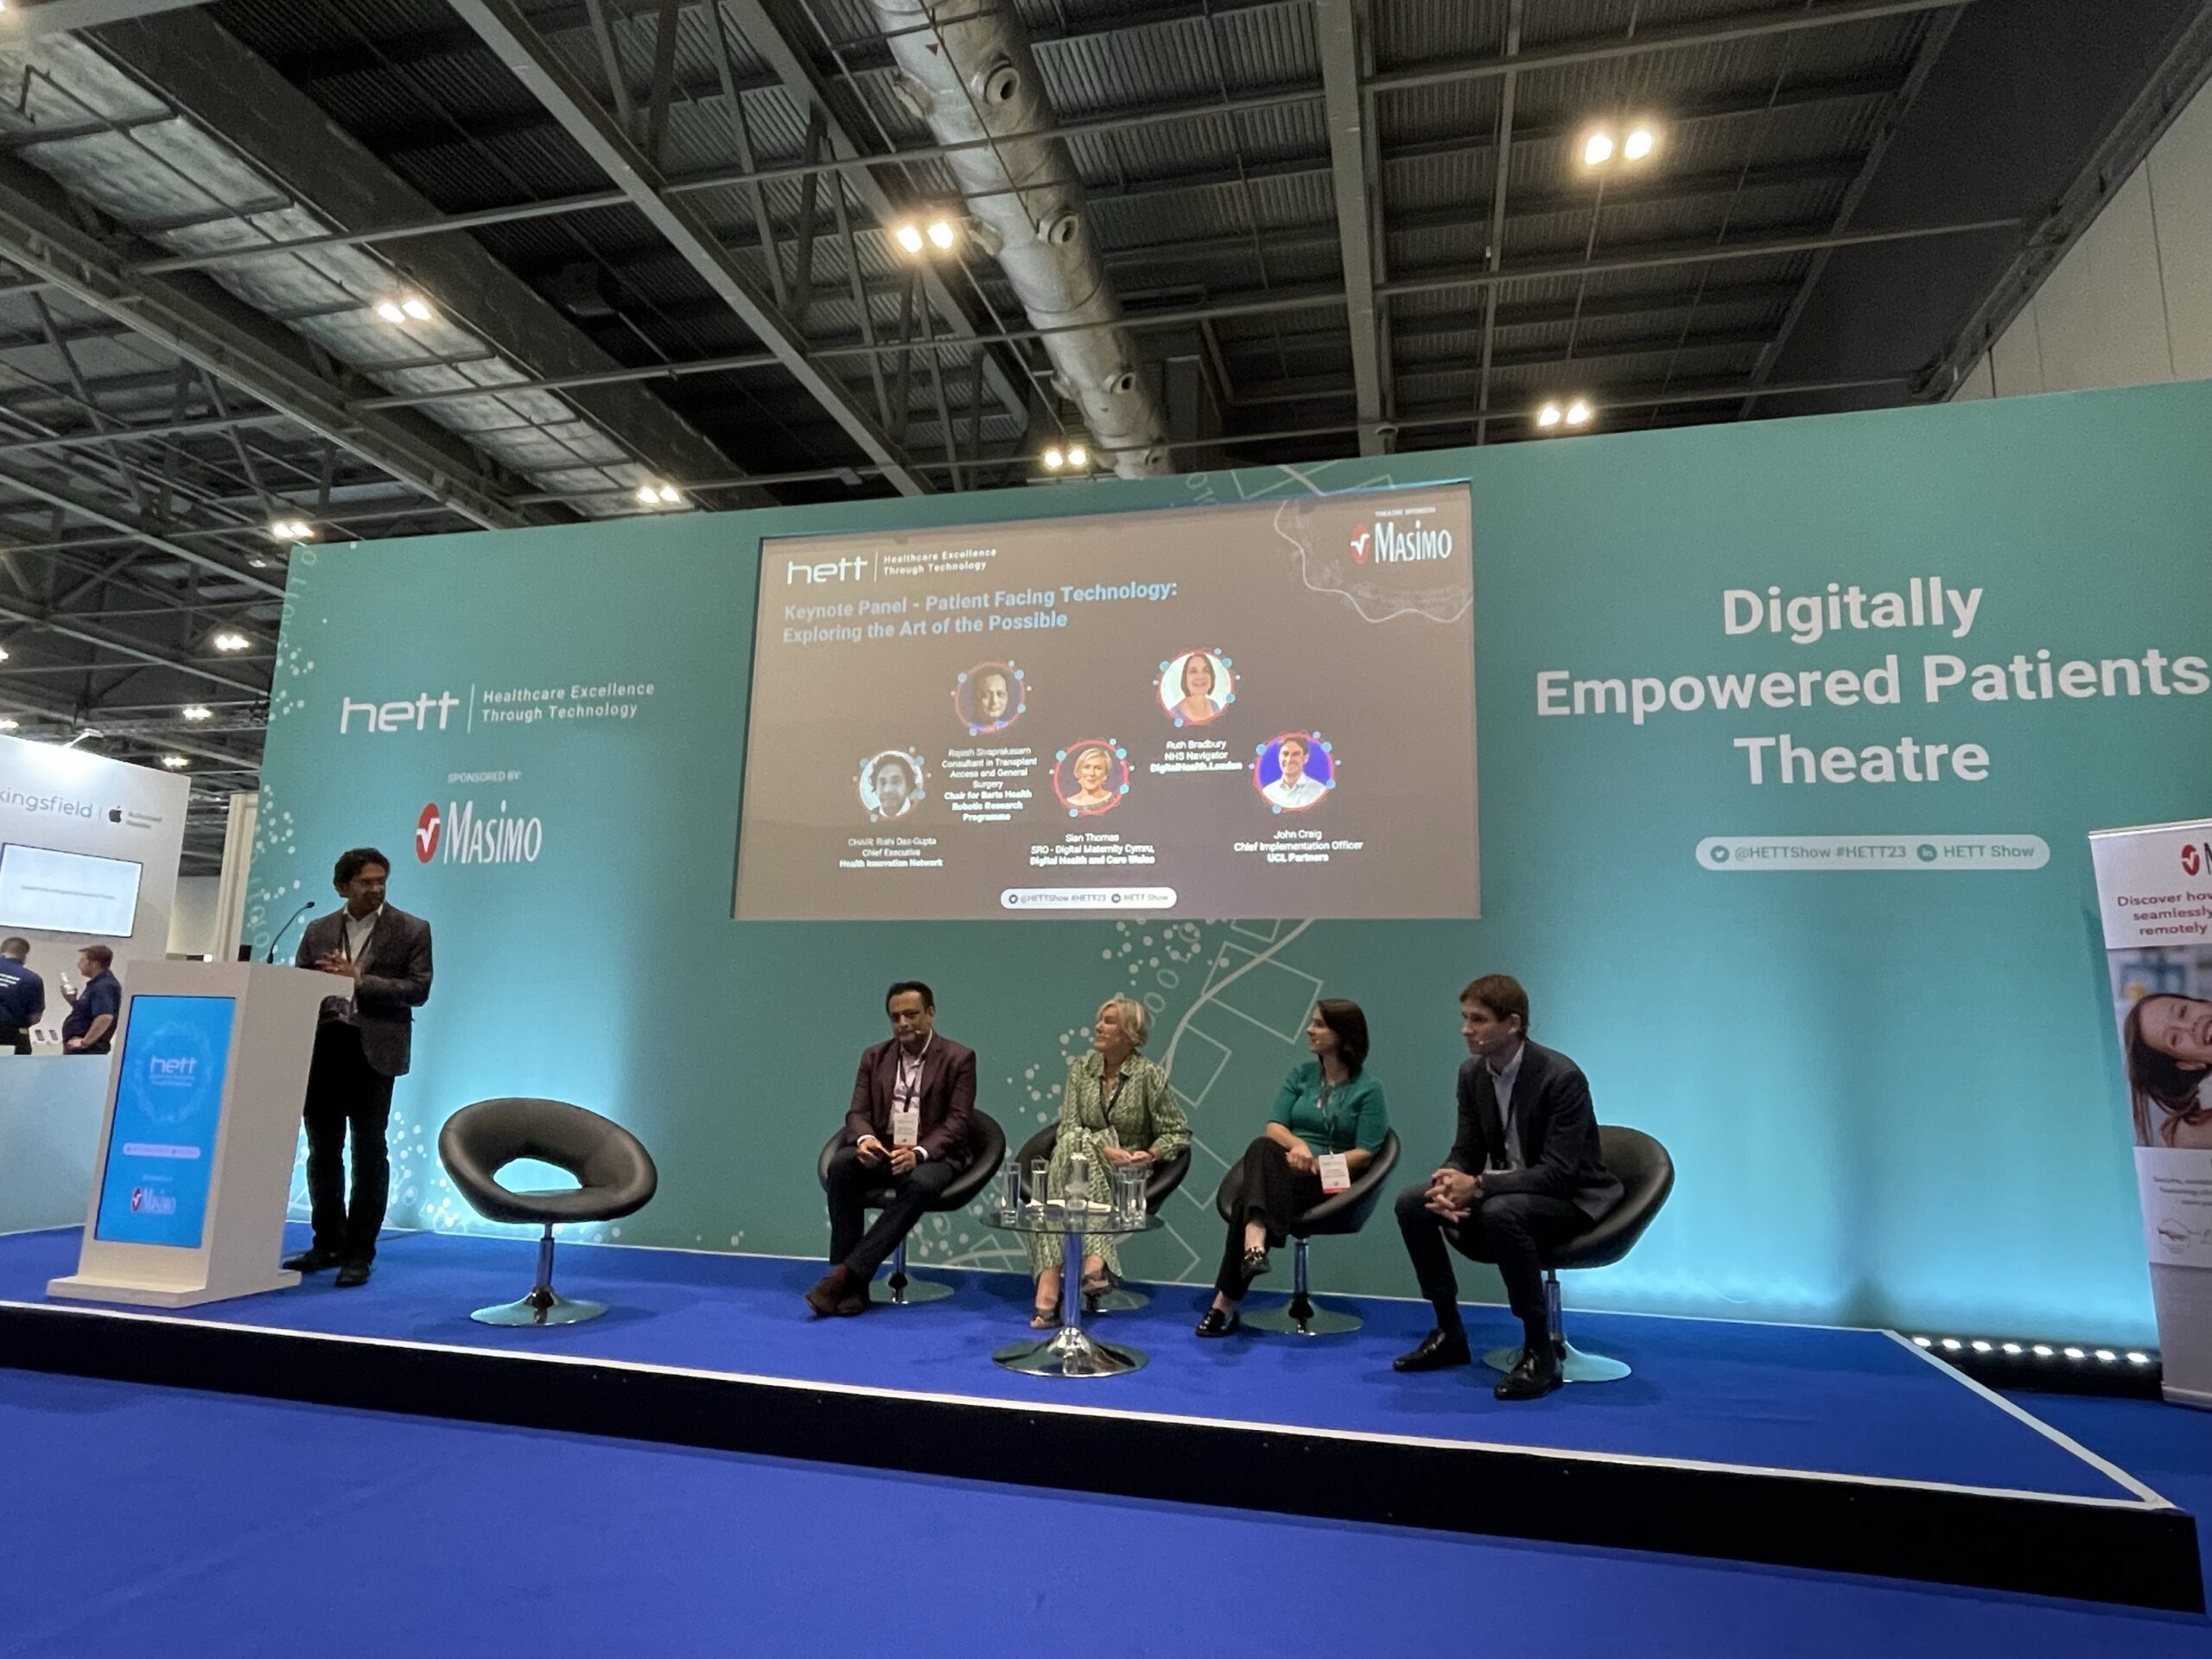 Patient Facing Technology – Exploring the Art of the Possible - DigitalHealth.London